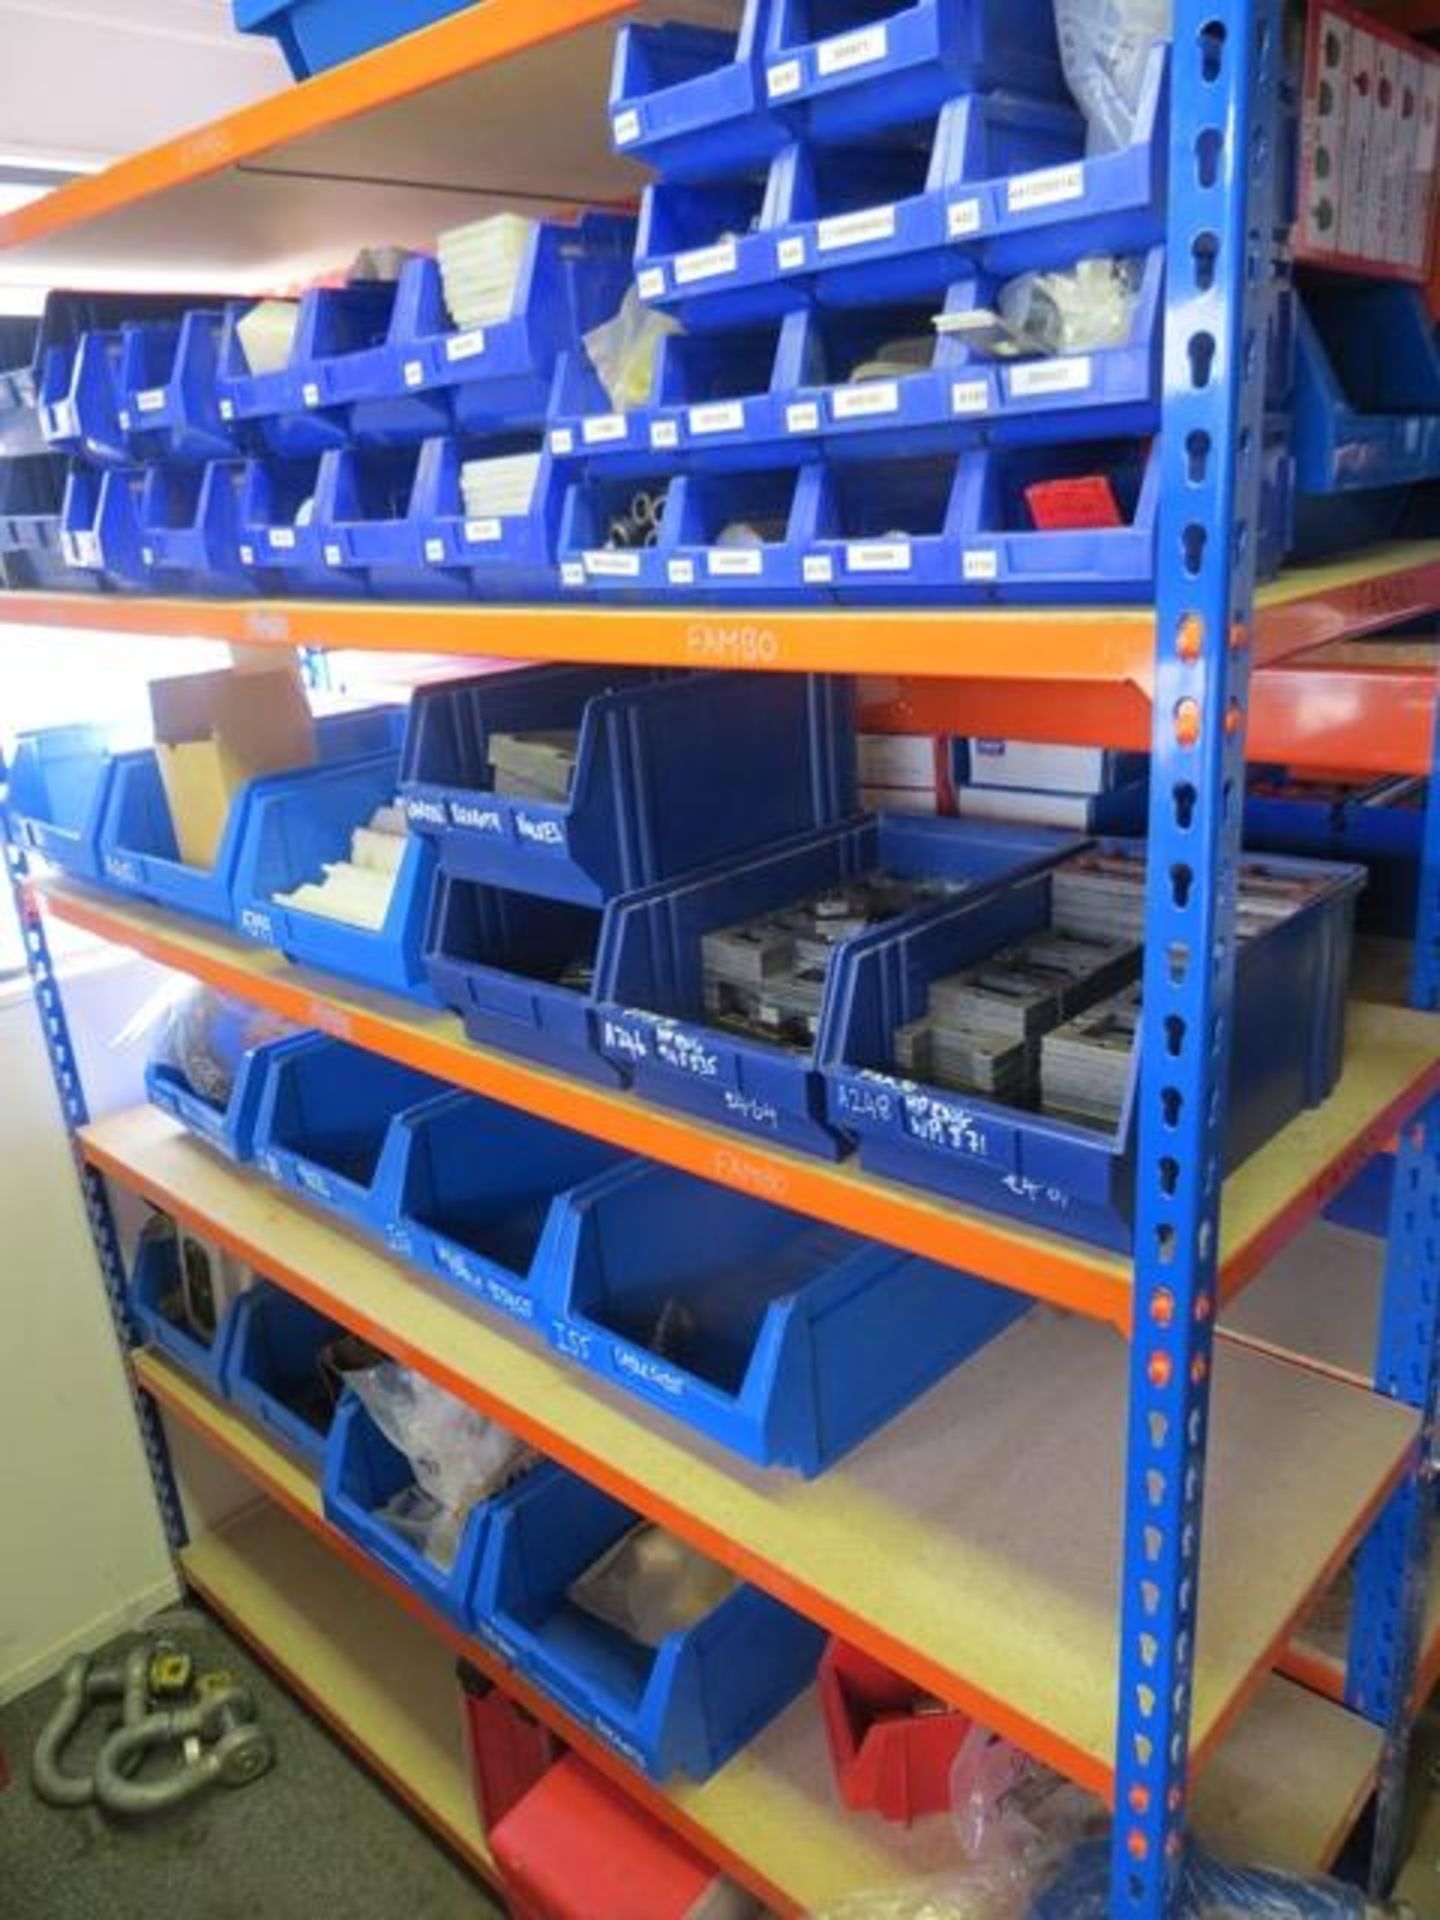 Slot together rack c/w Fambo repair equipment as lotted